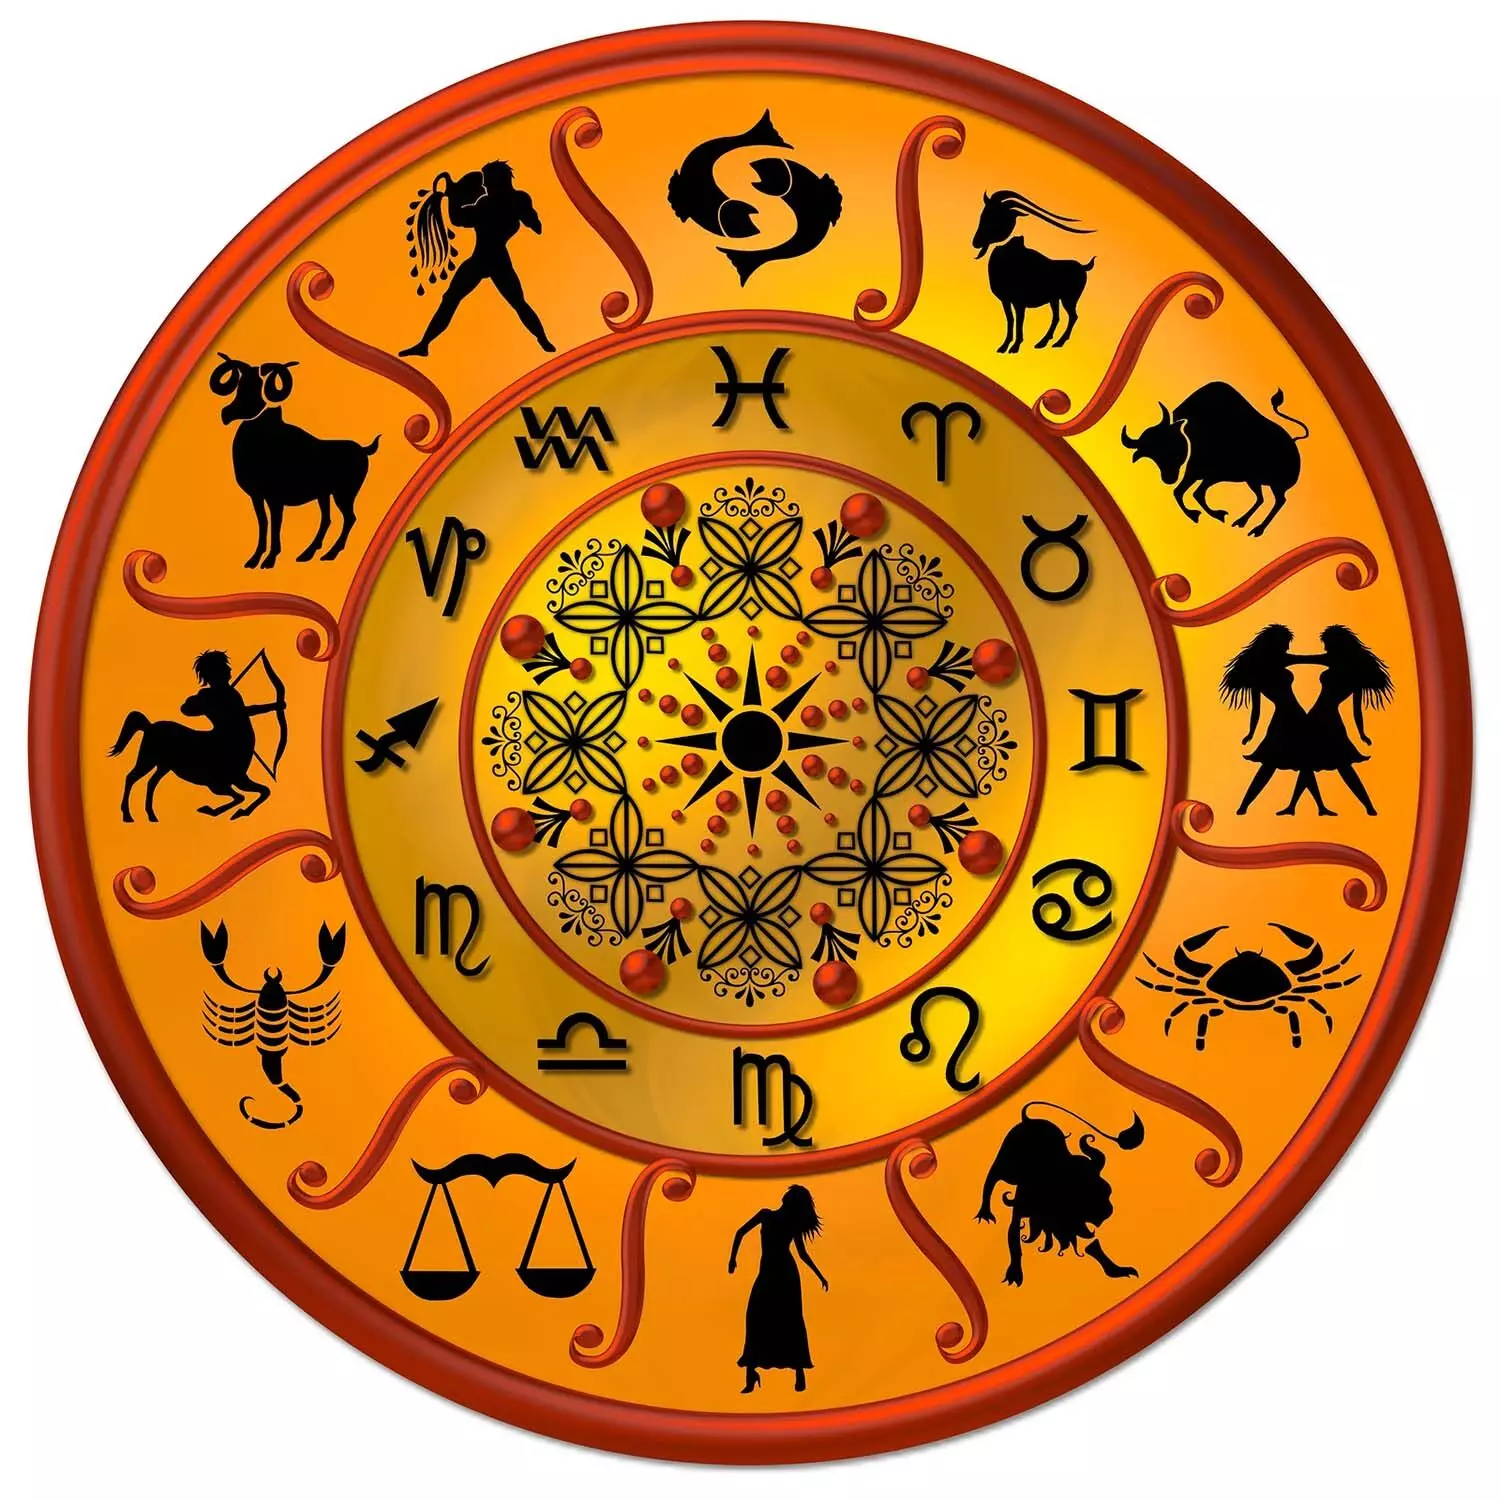 13 June – Know your todays horoscope